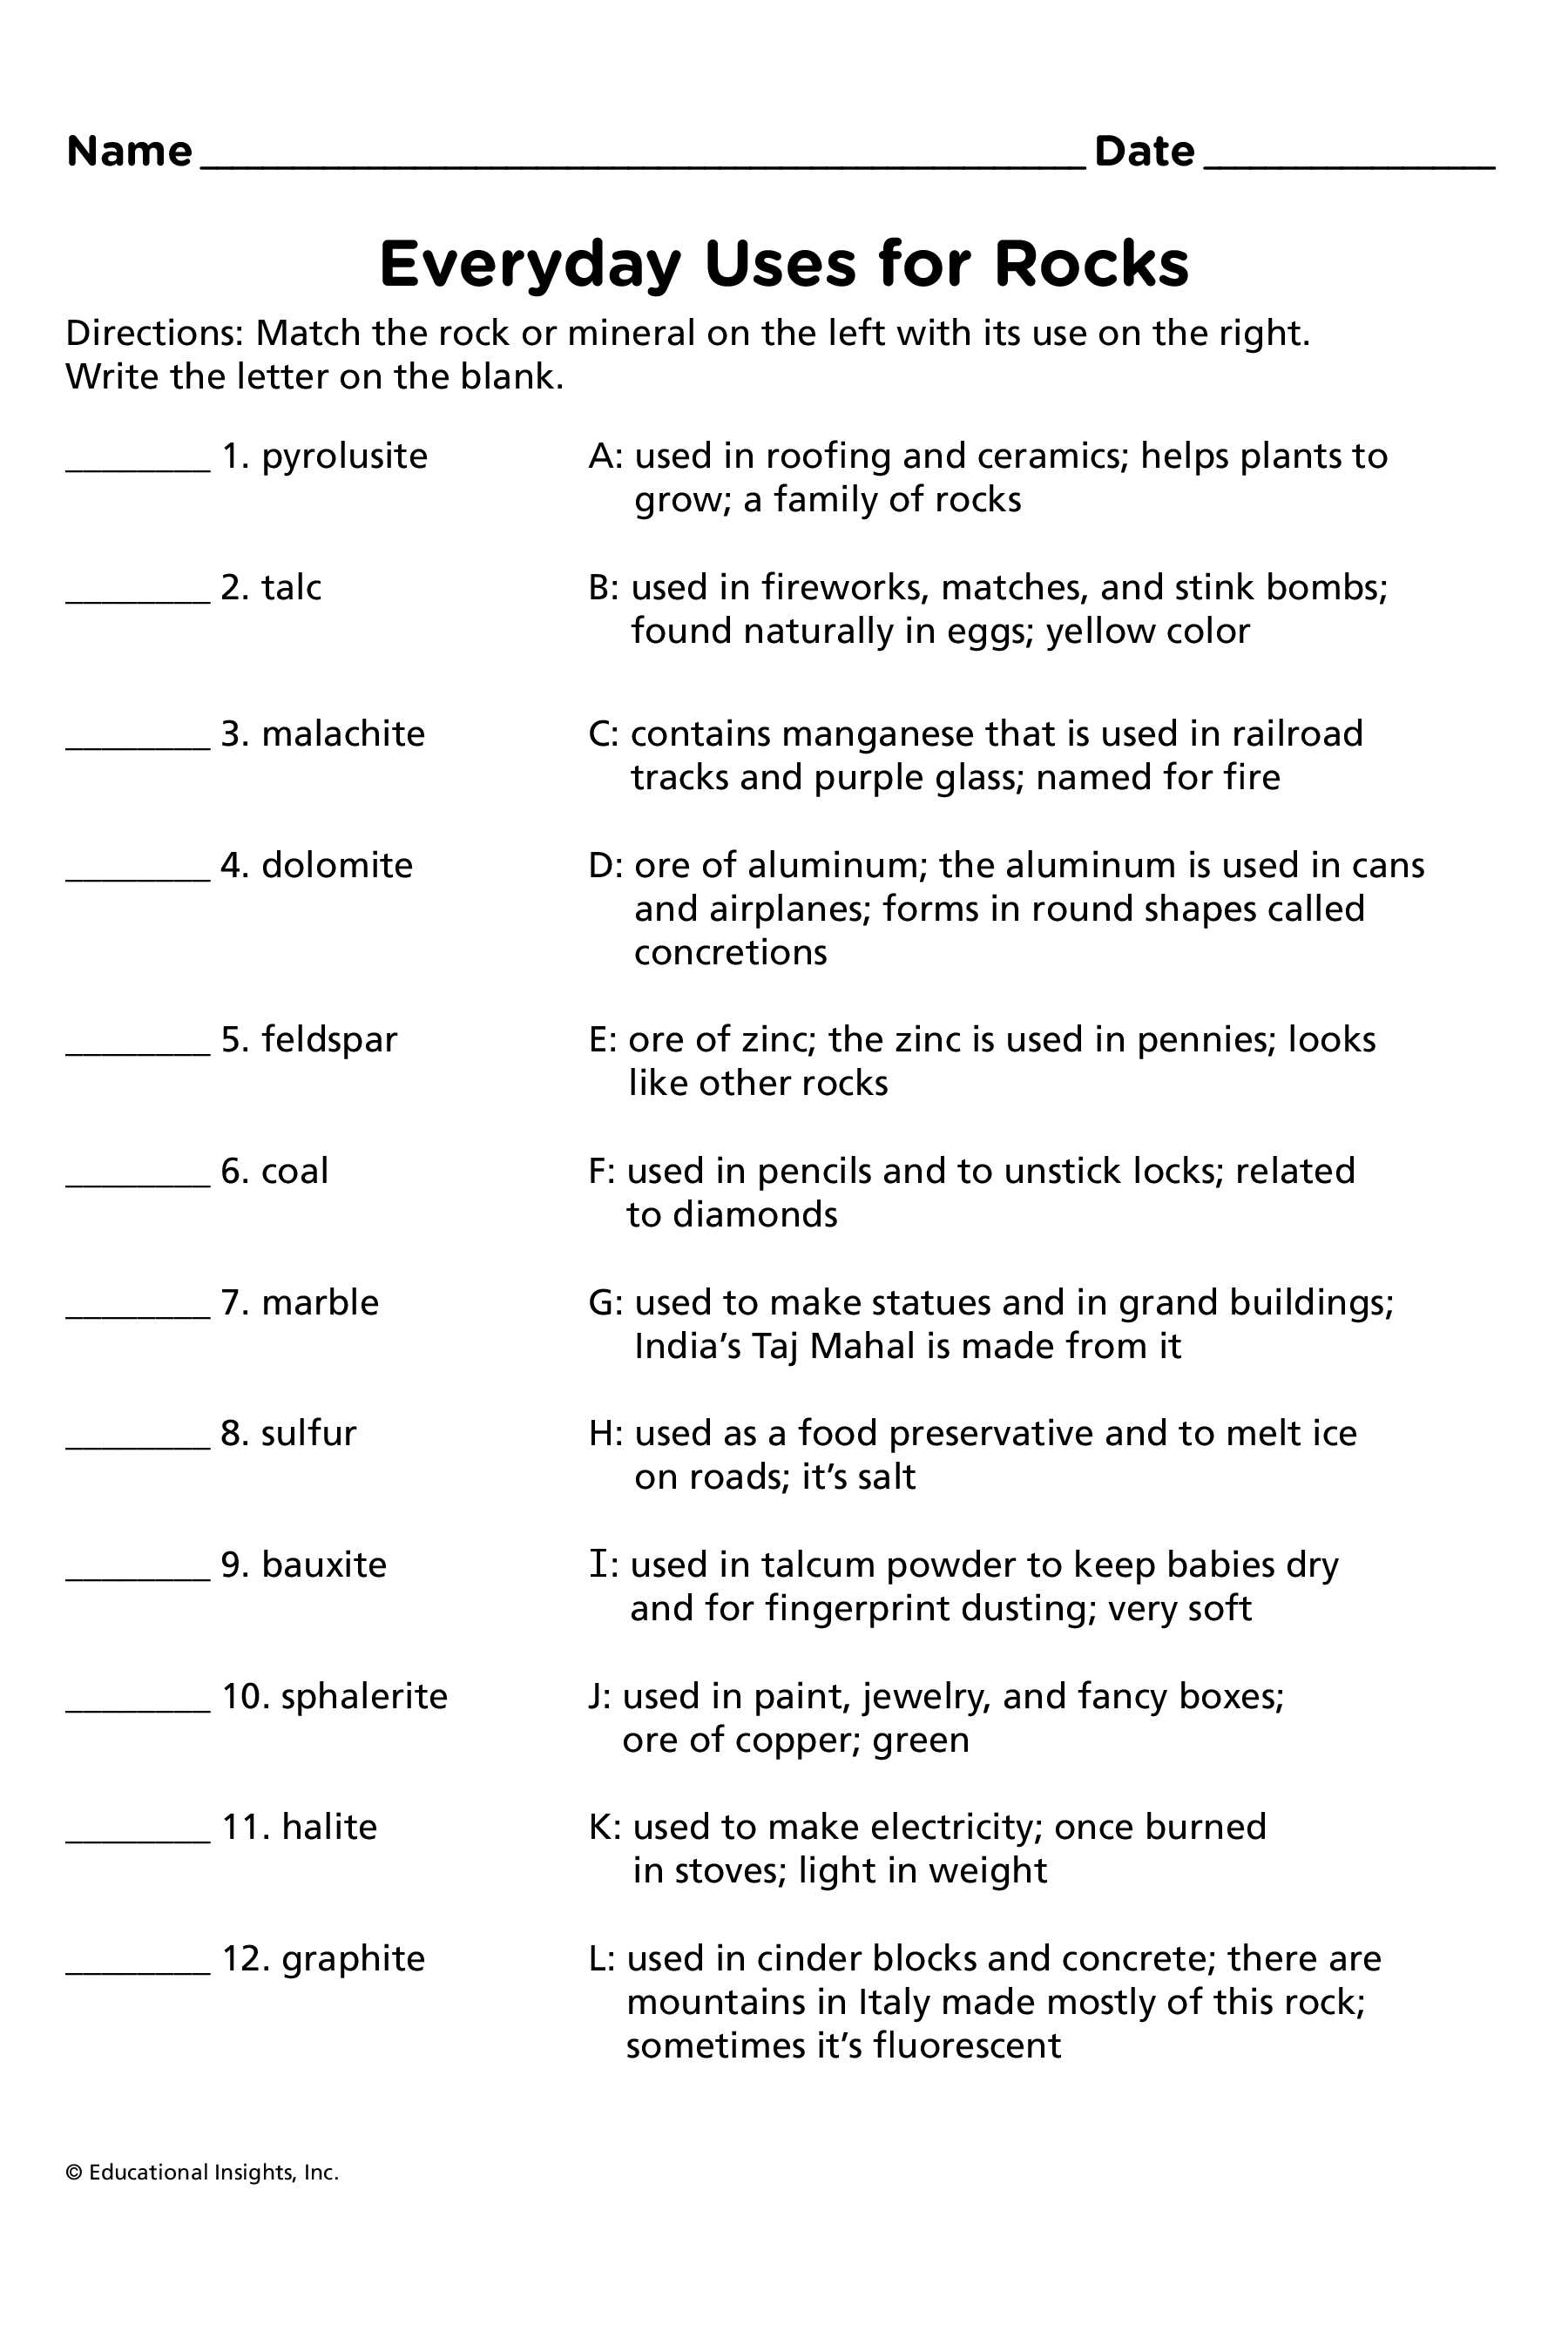 Nutrition Worksheets Pdf with Everyday Uses Rock & Card Set Pinterest